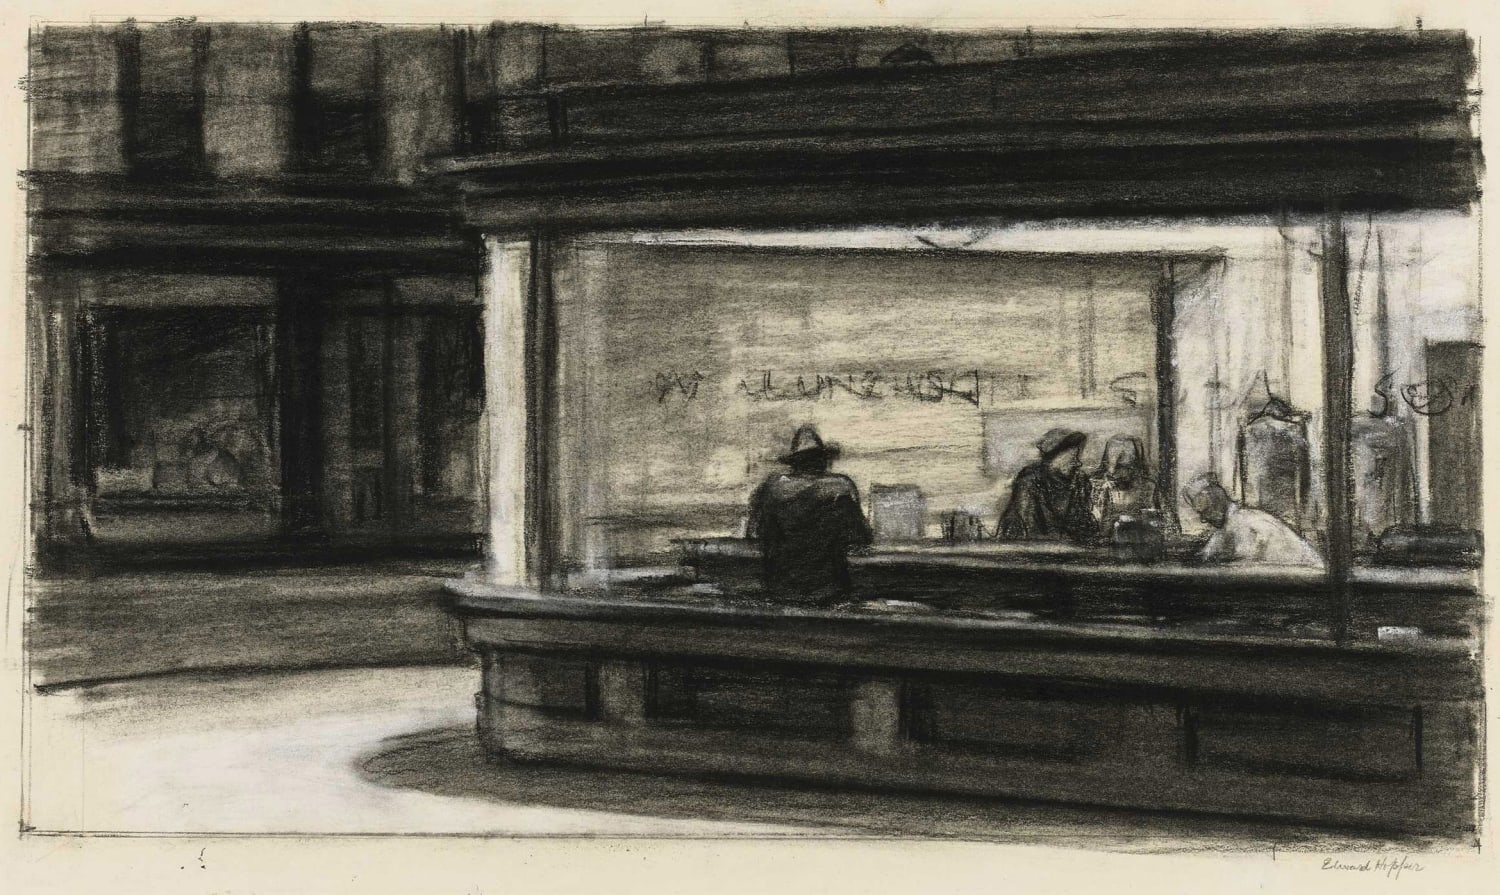 Edward Hopper's preliminary sketch of his famous 'Nighthawks', 1941